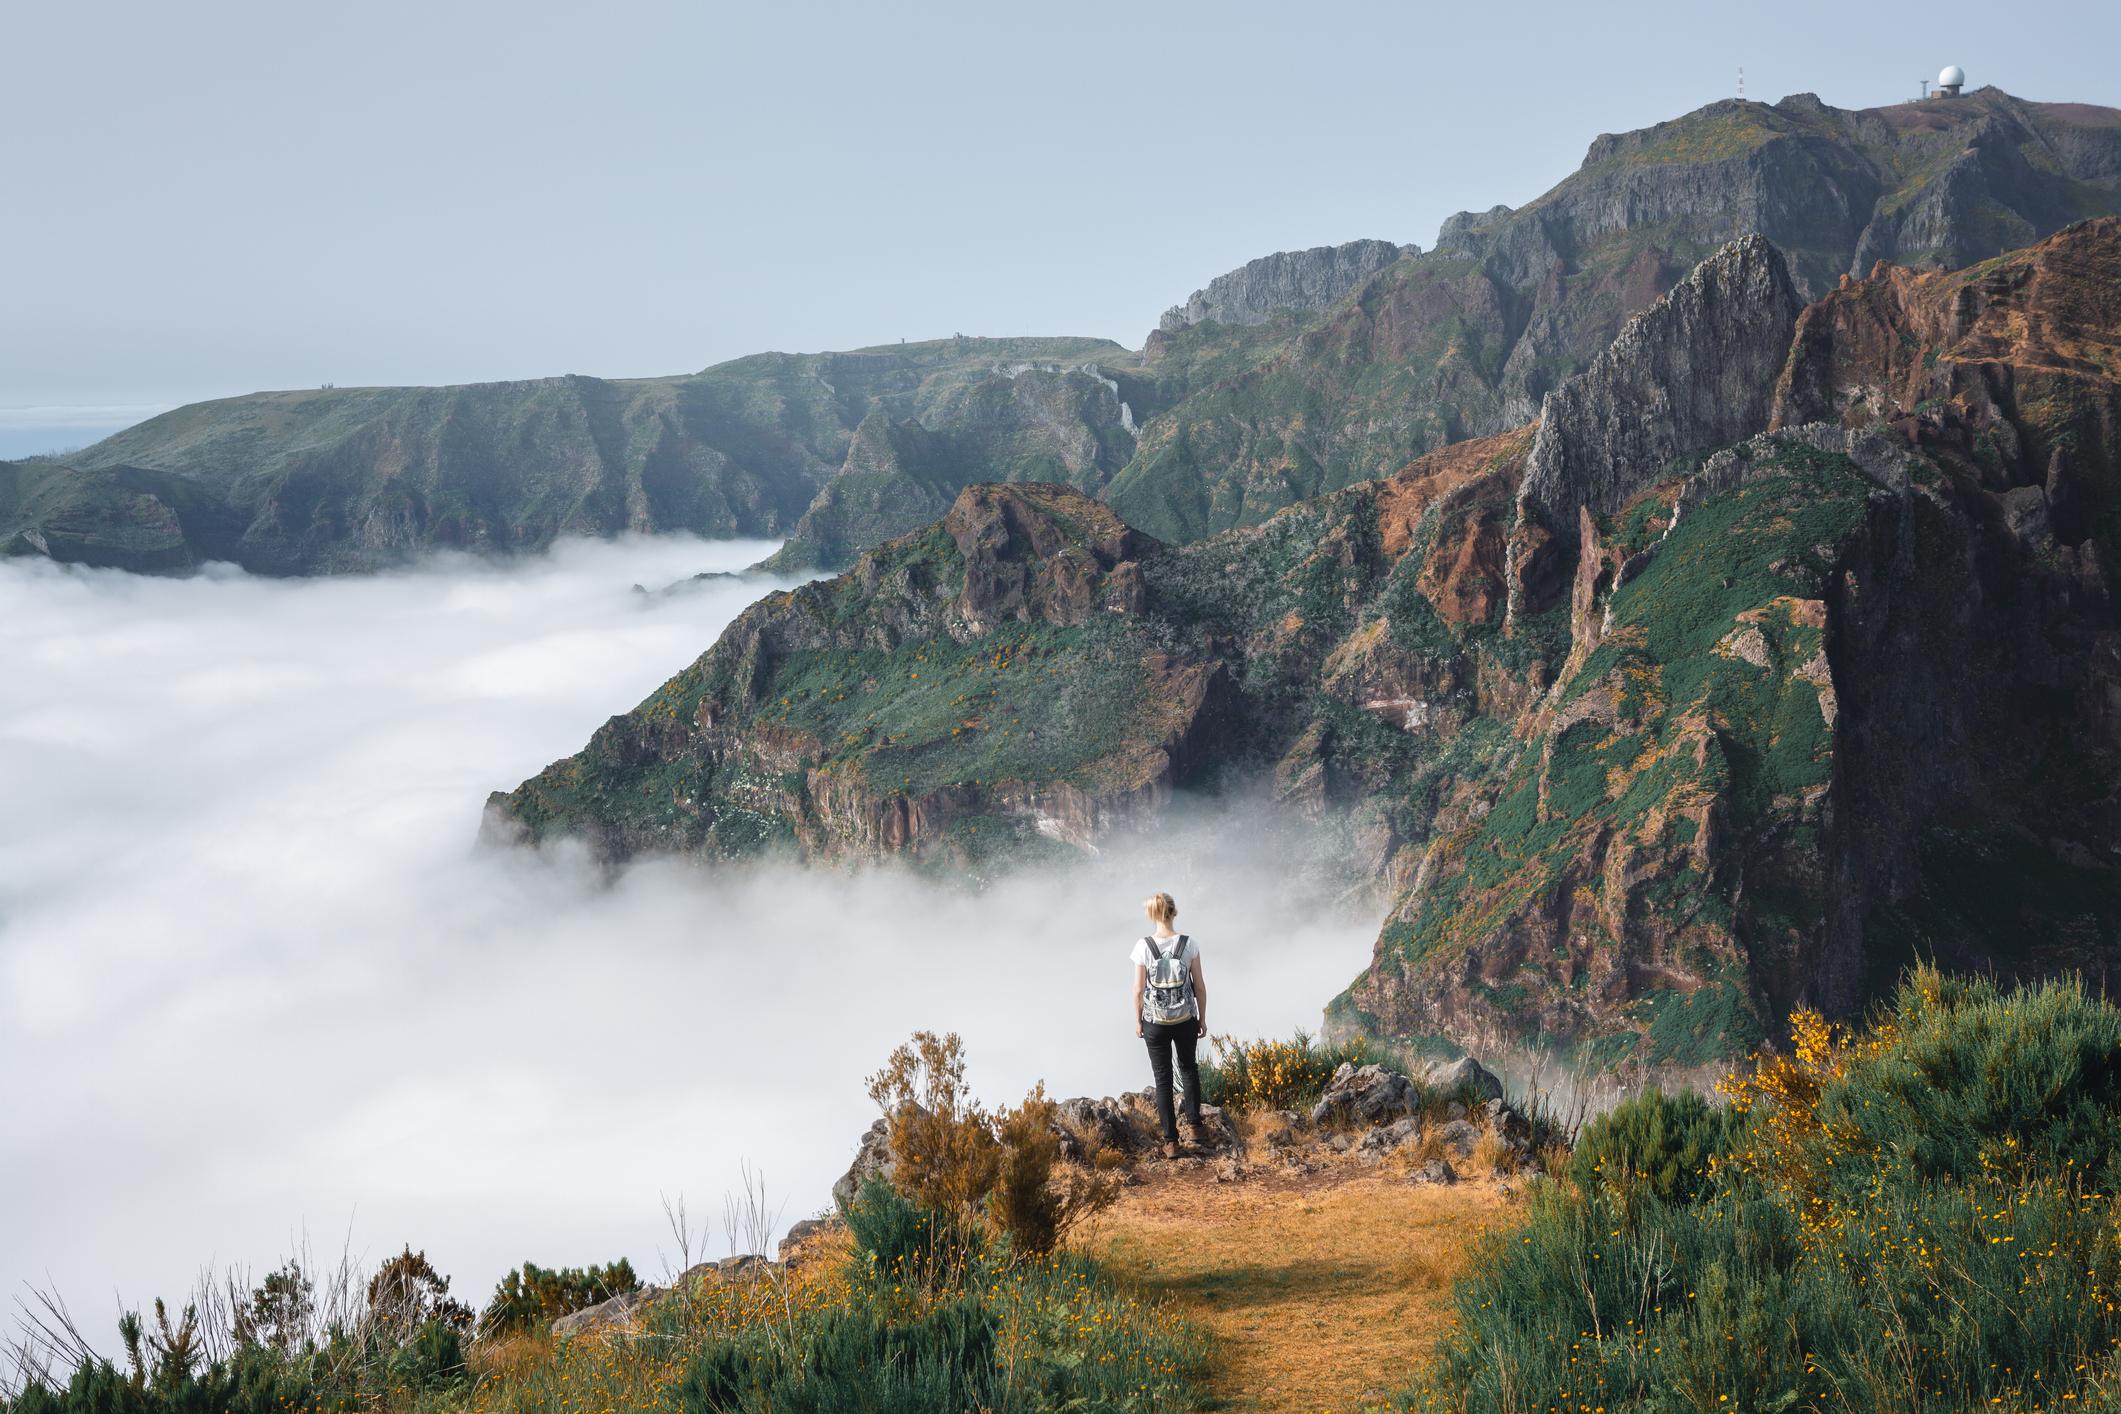 A hiker looks out over the mountains in Madeira